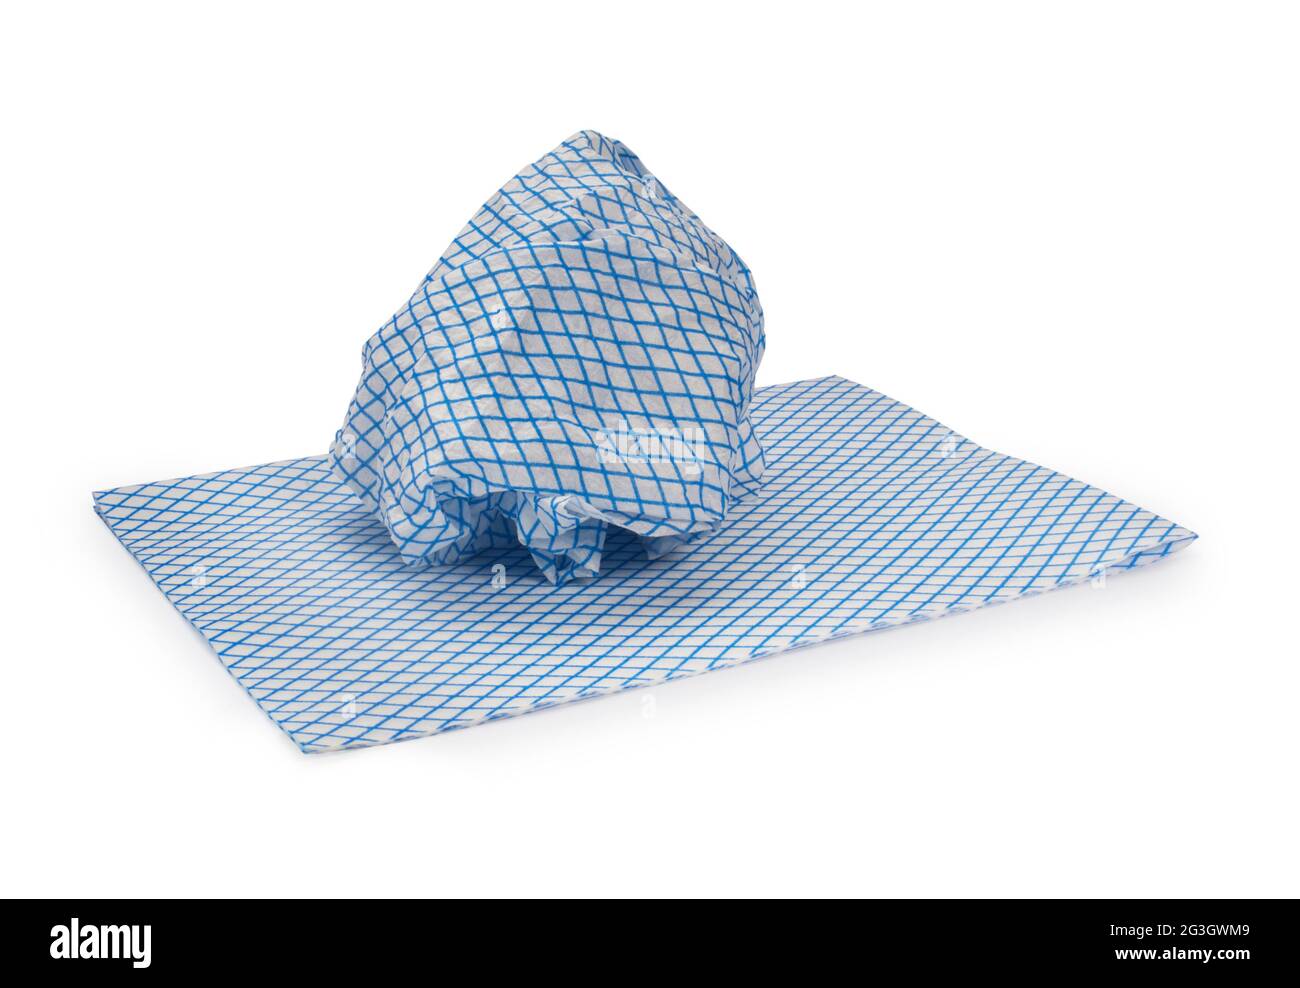 https://c8.alamy.com/comp/2G3GWM9/studio-shot-of-blue-and-white-kitchen-cleaning-cloths-cut-out-against-a-white-background-john-gollop-2G3GWM9.jpg